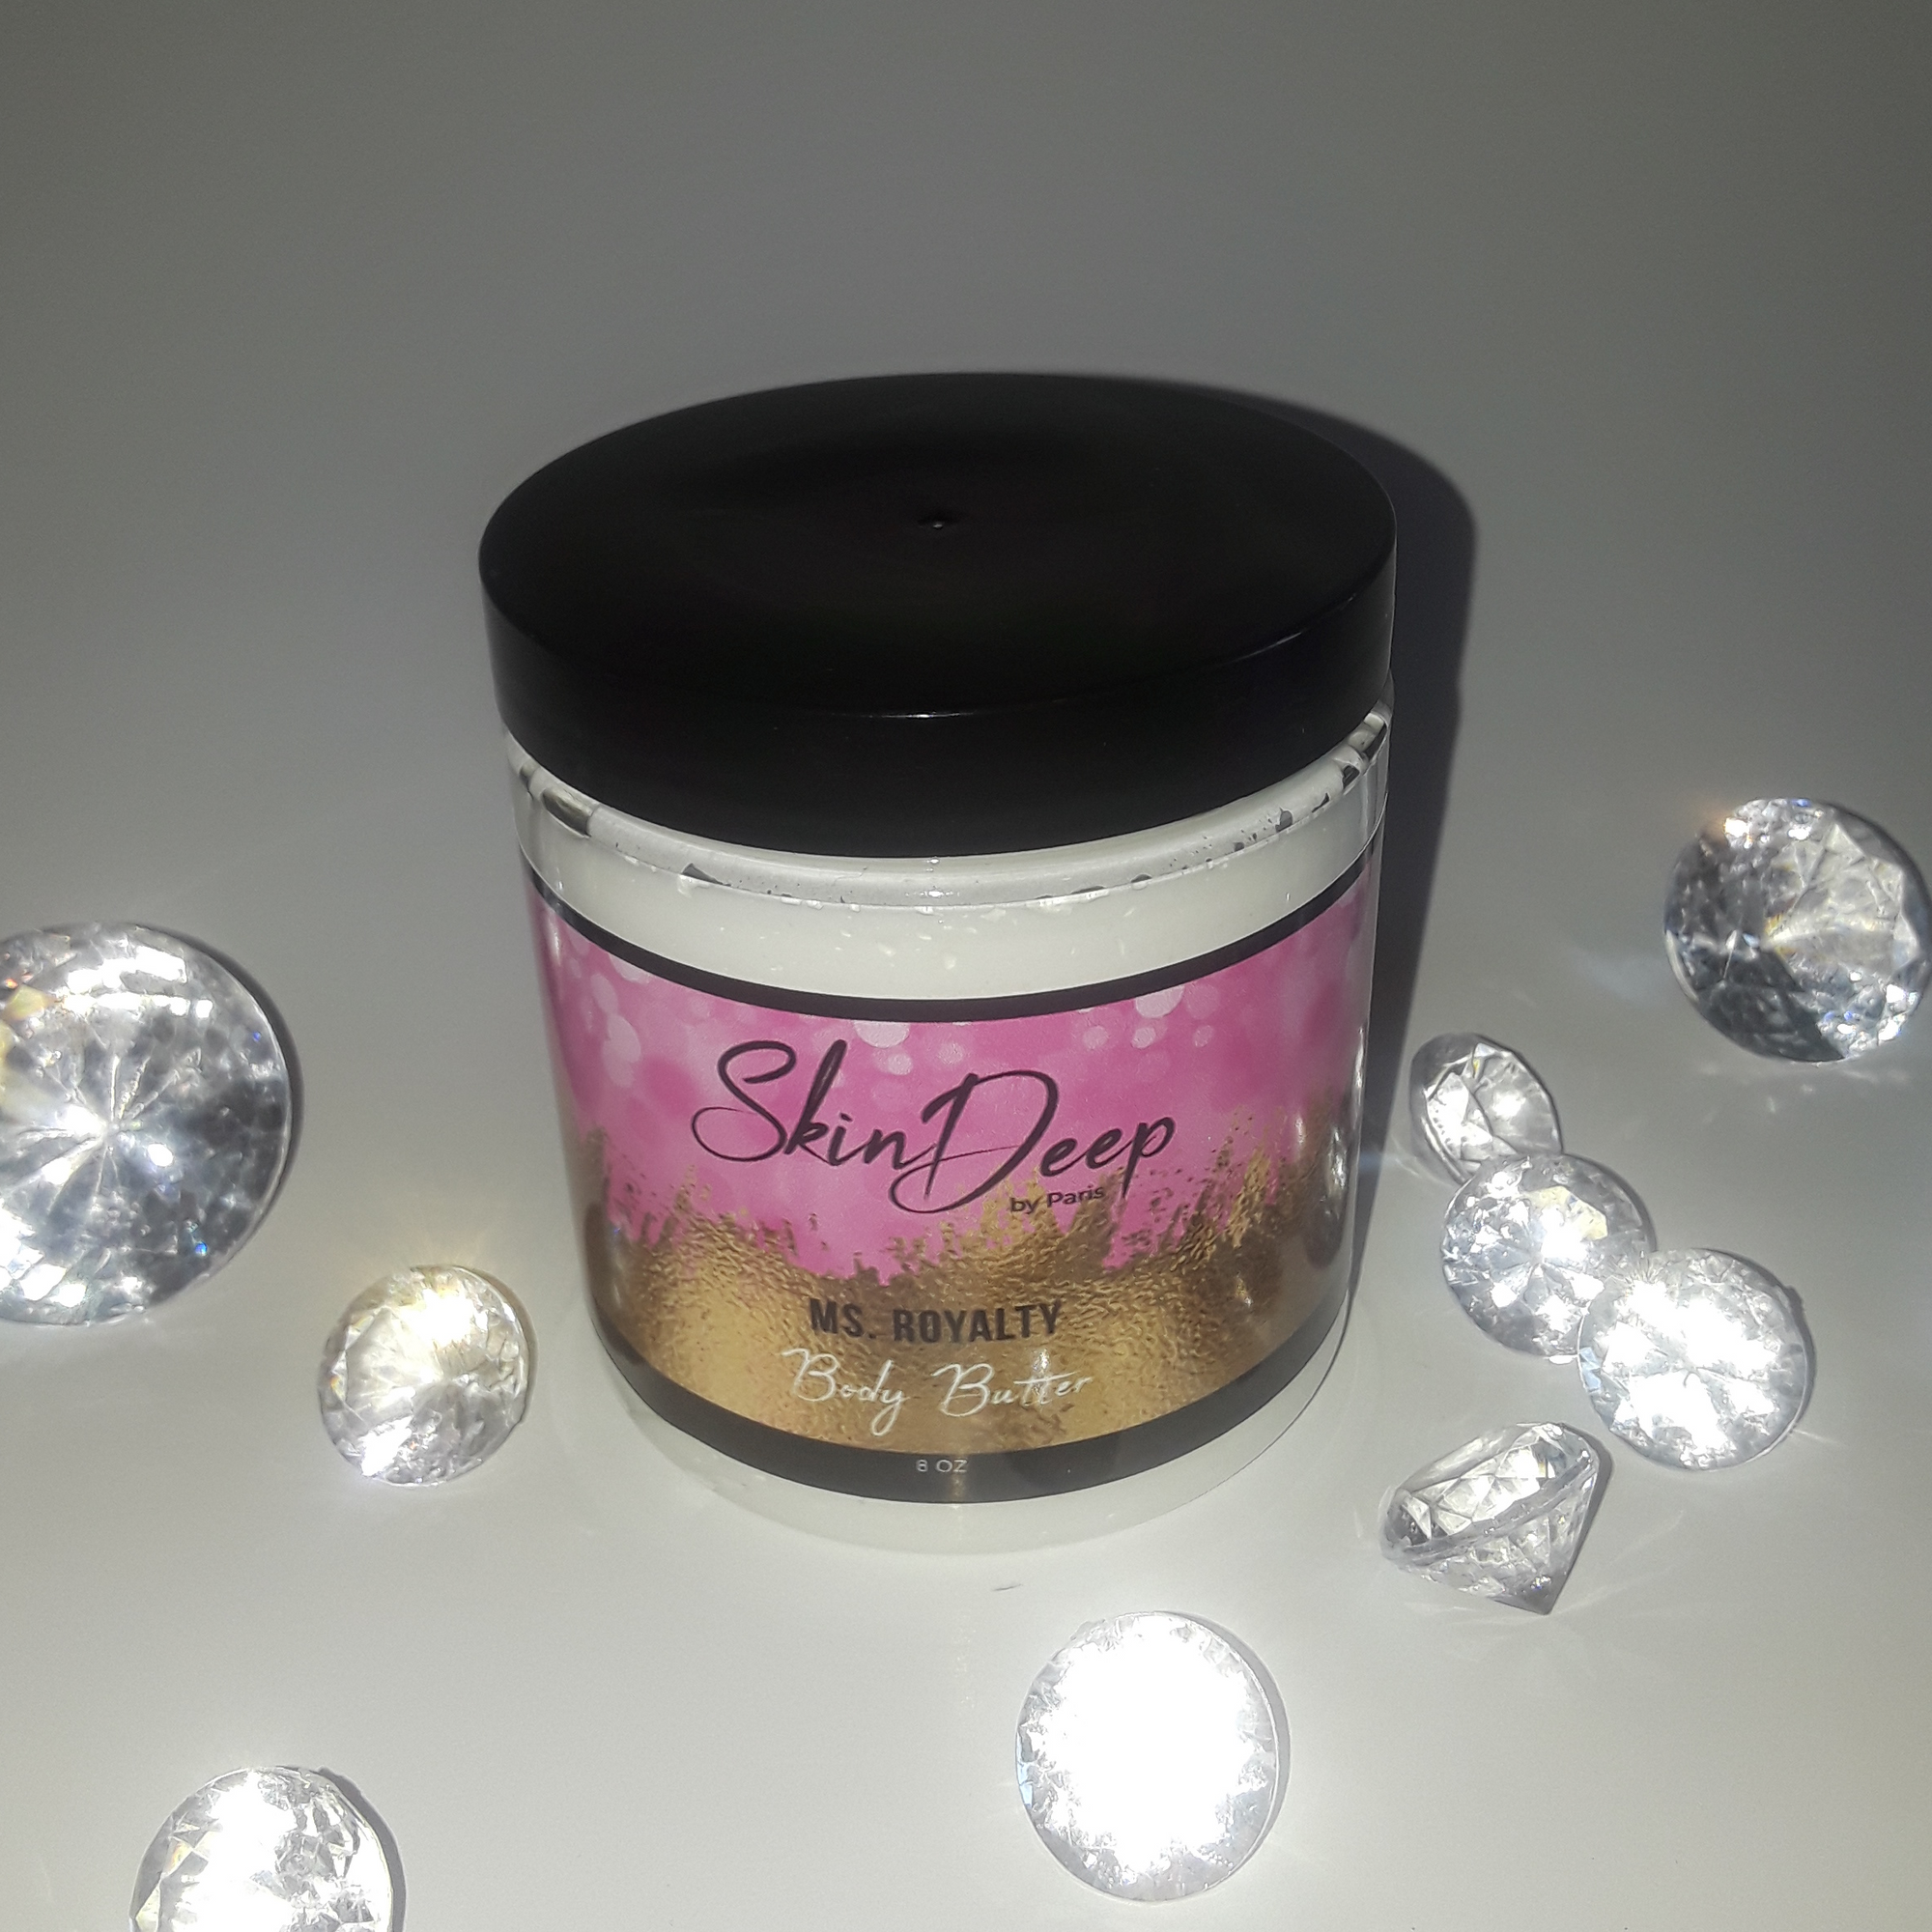 Ms. Royalty  Body Butter